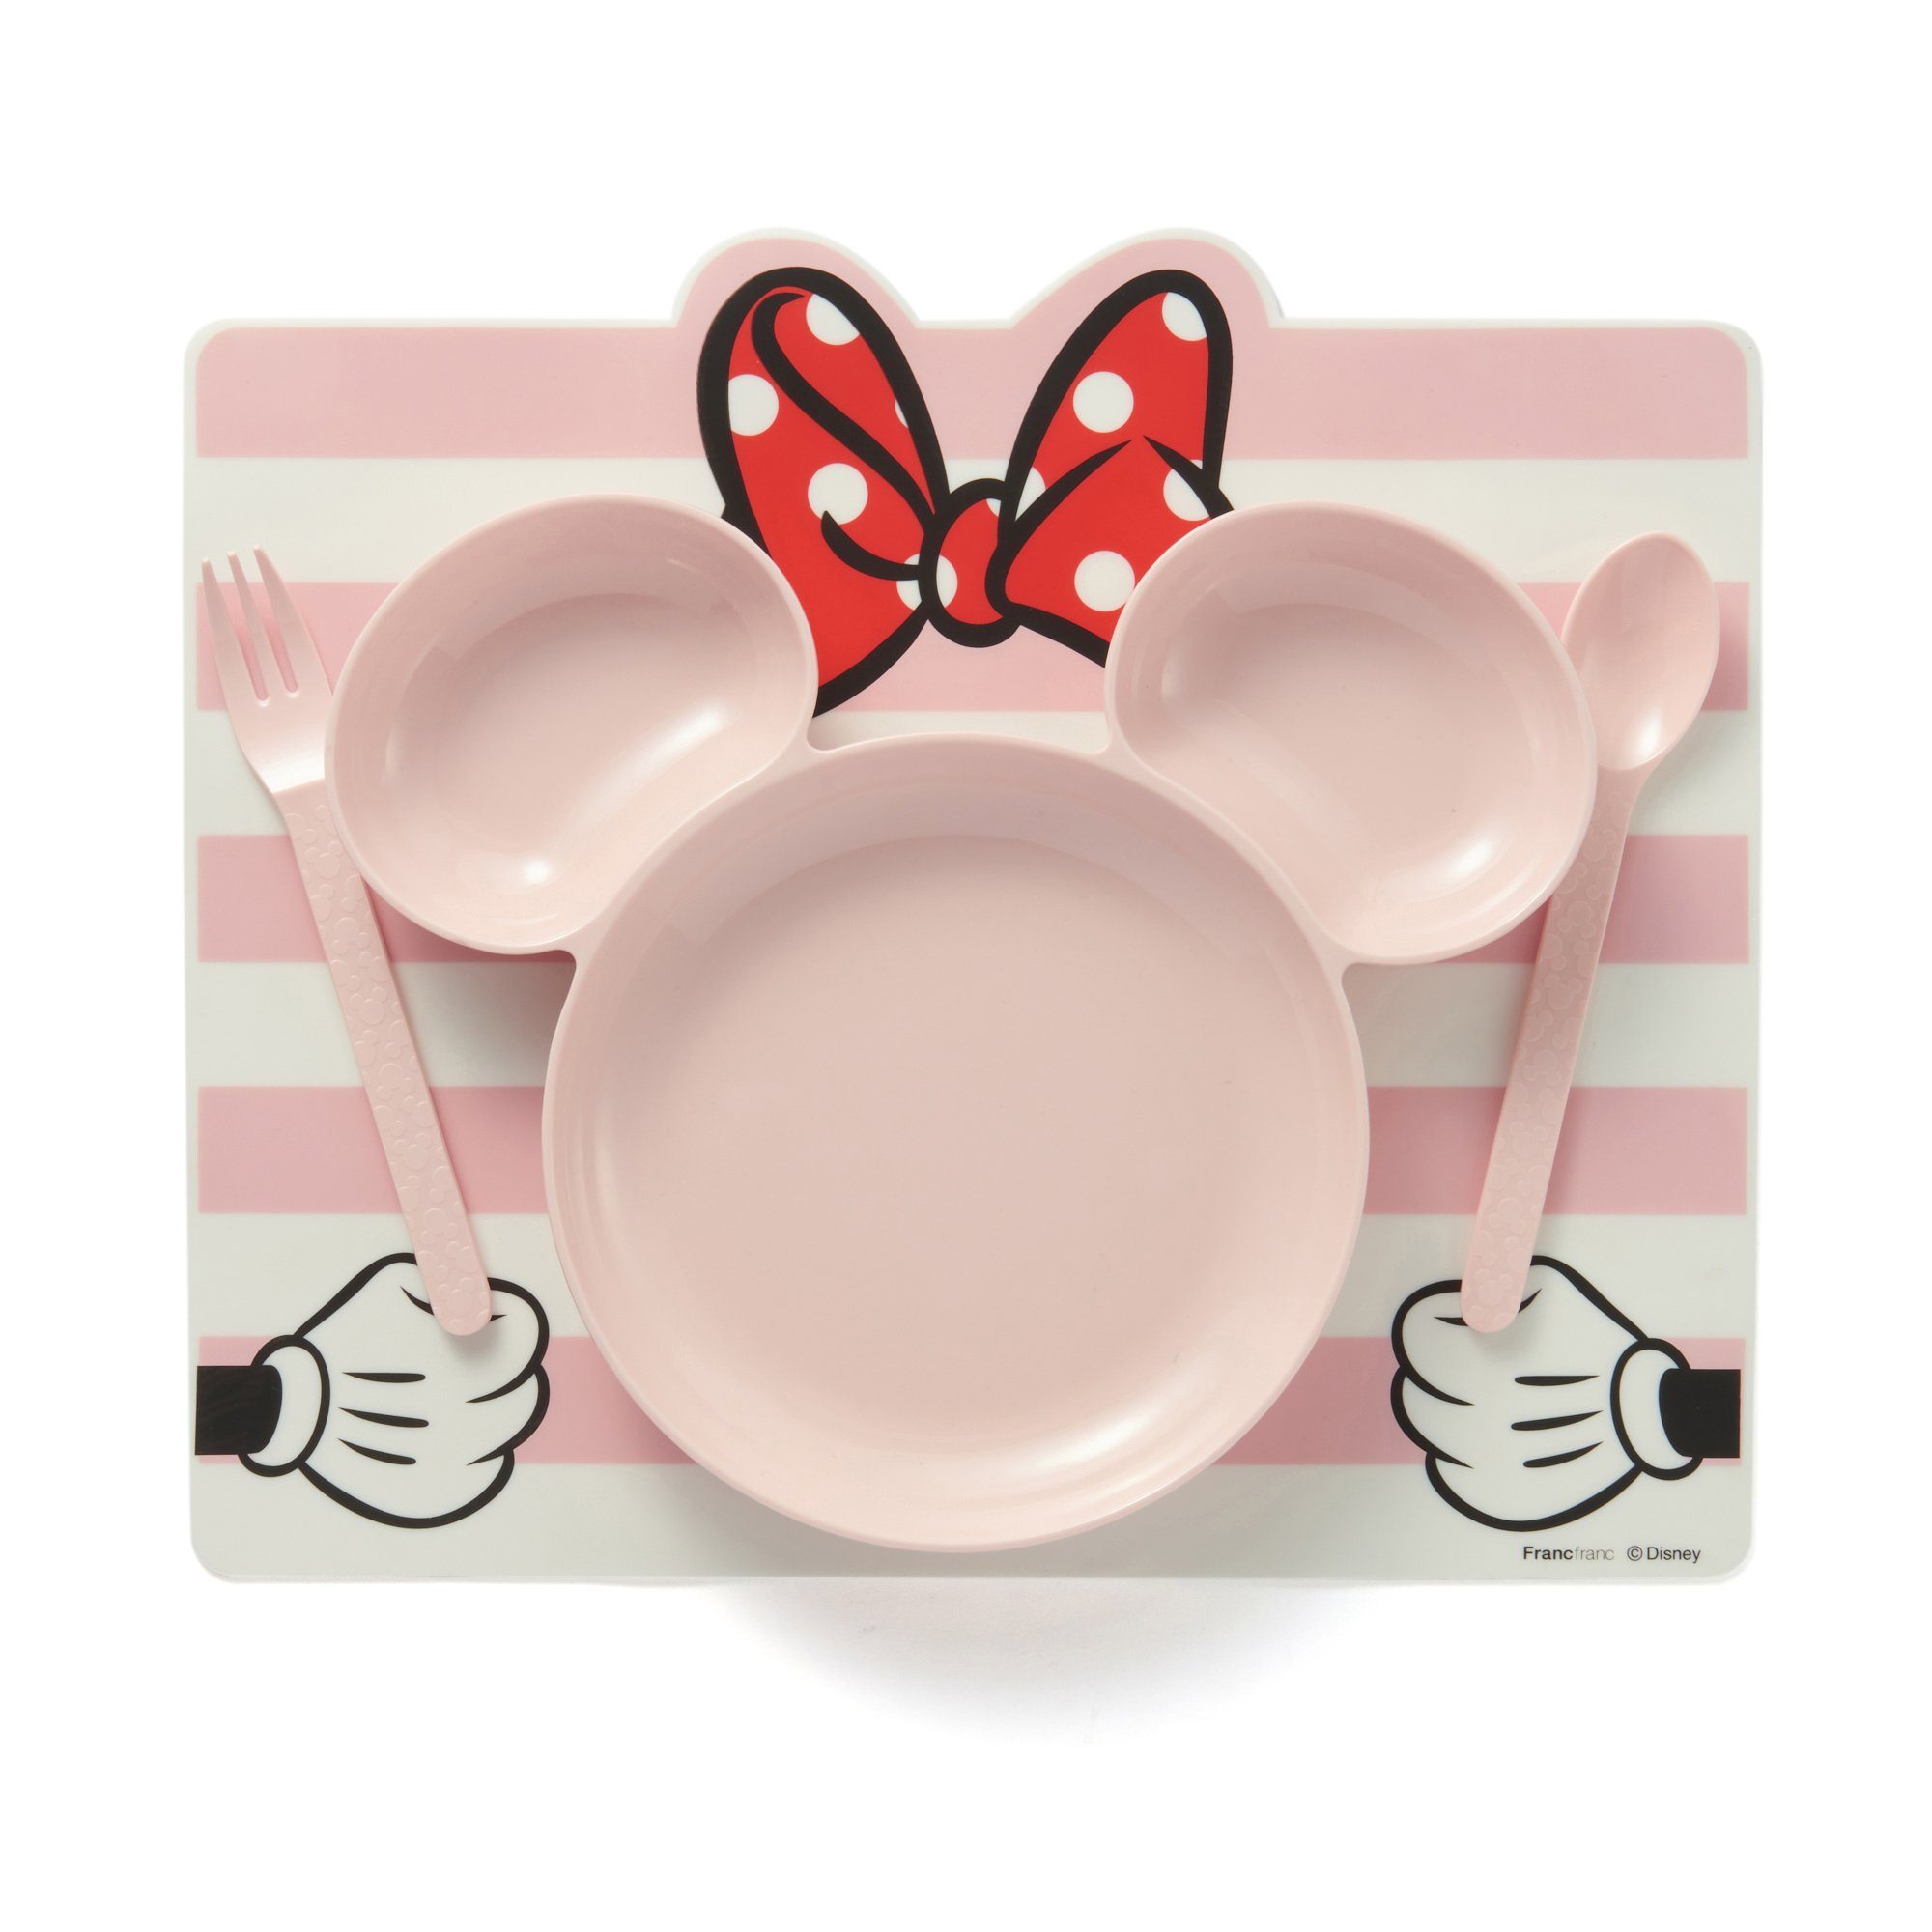 DISNEY SILICONE LUNCH MAT PINK